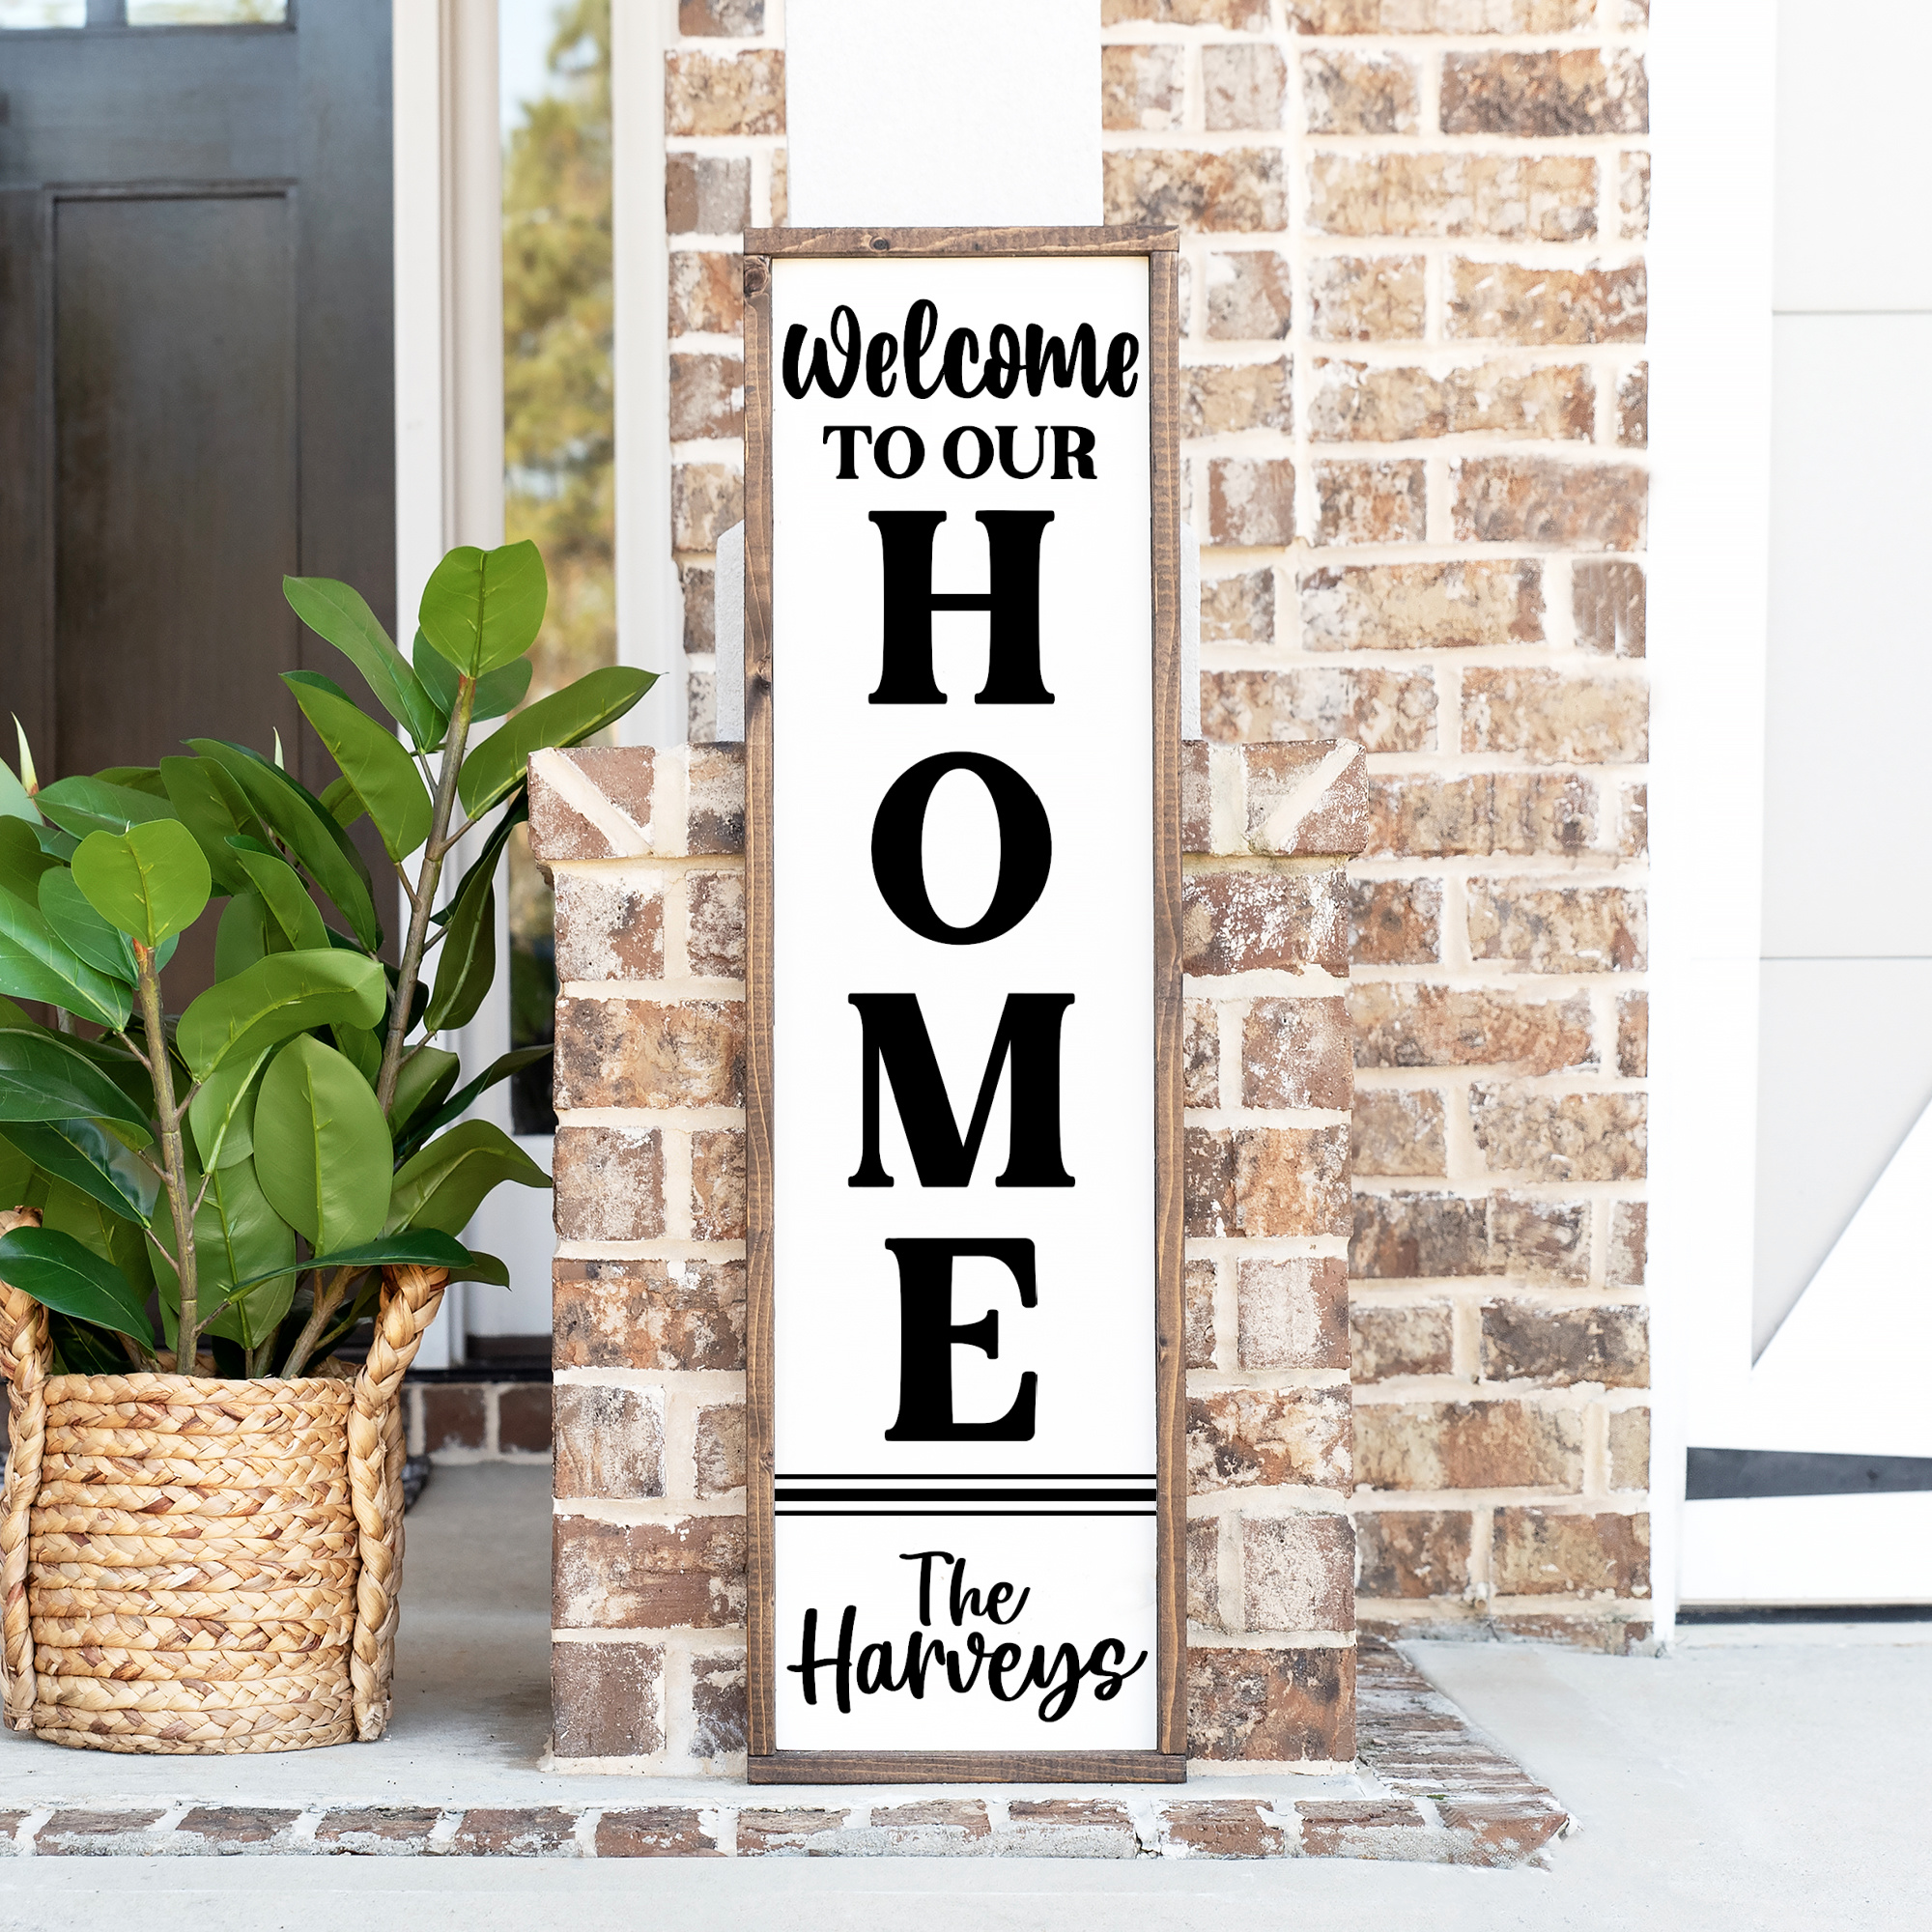 Download Diy Porch Signs With Free Svg Files Life Sew Savory